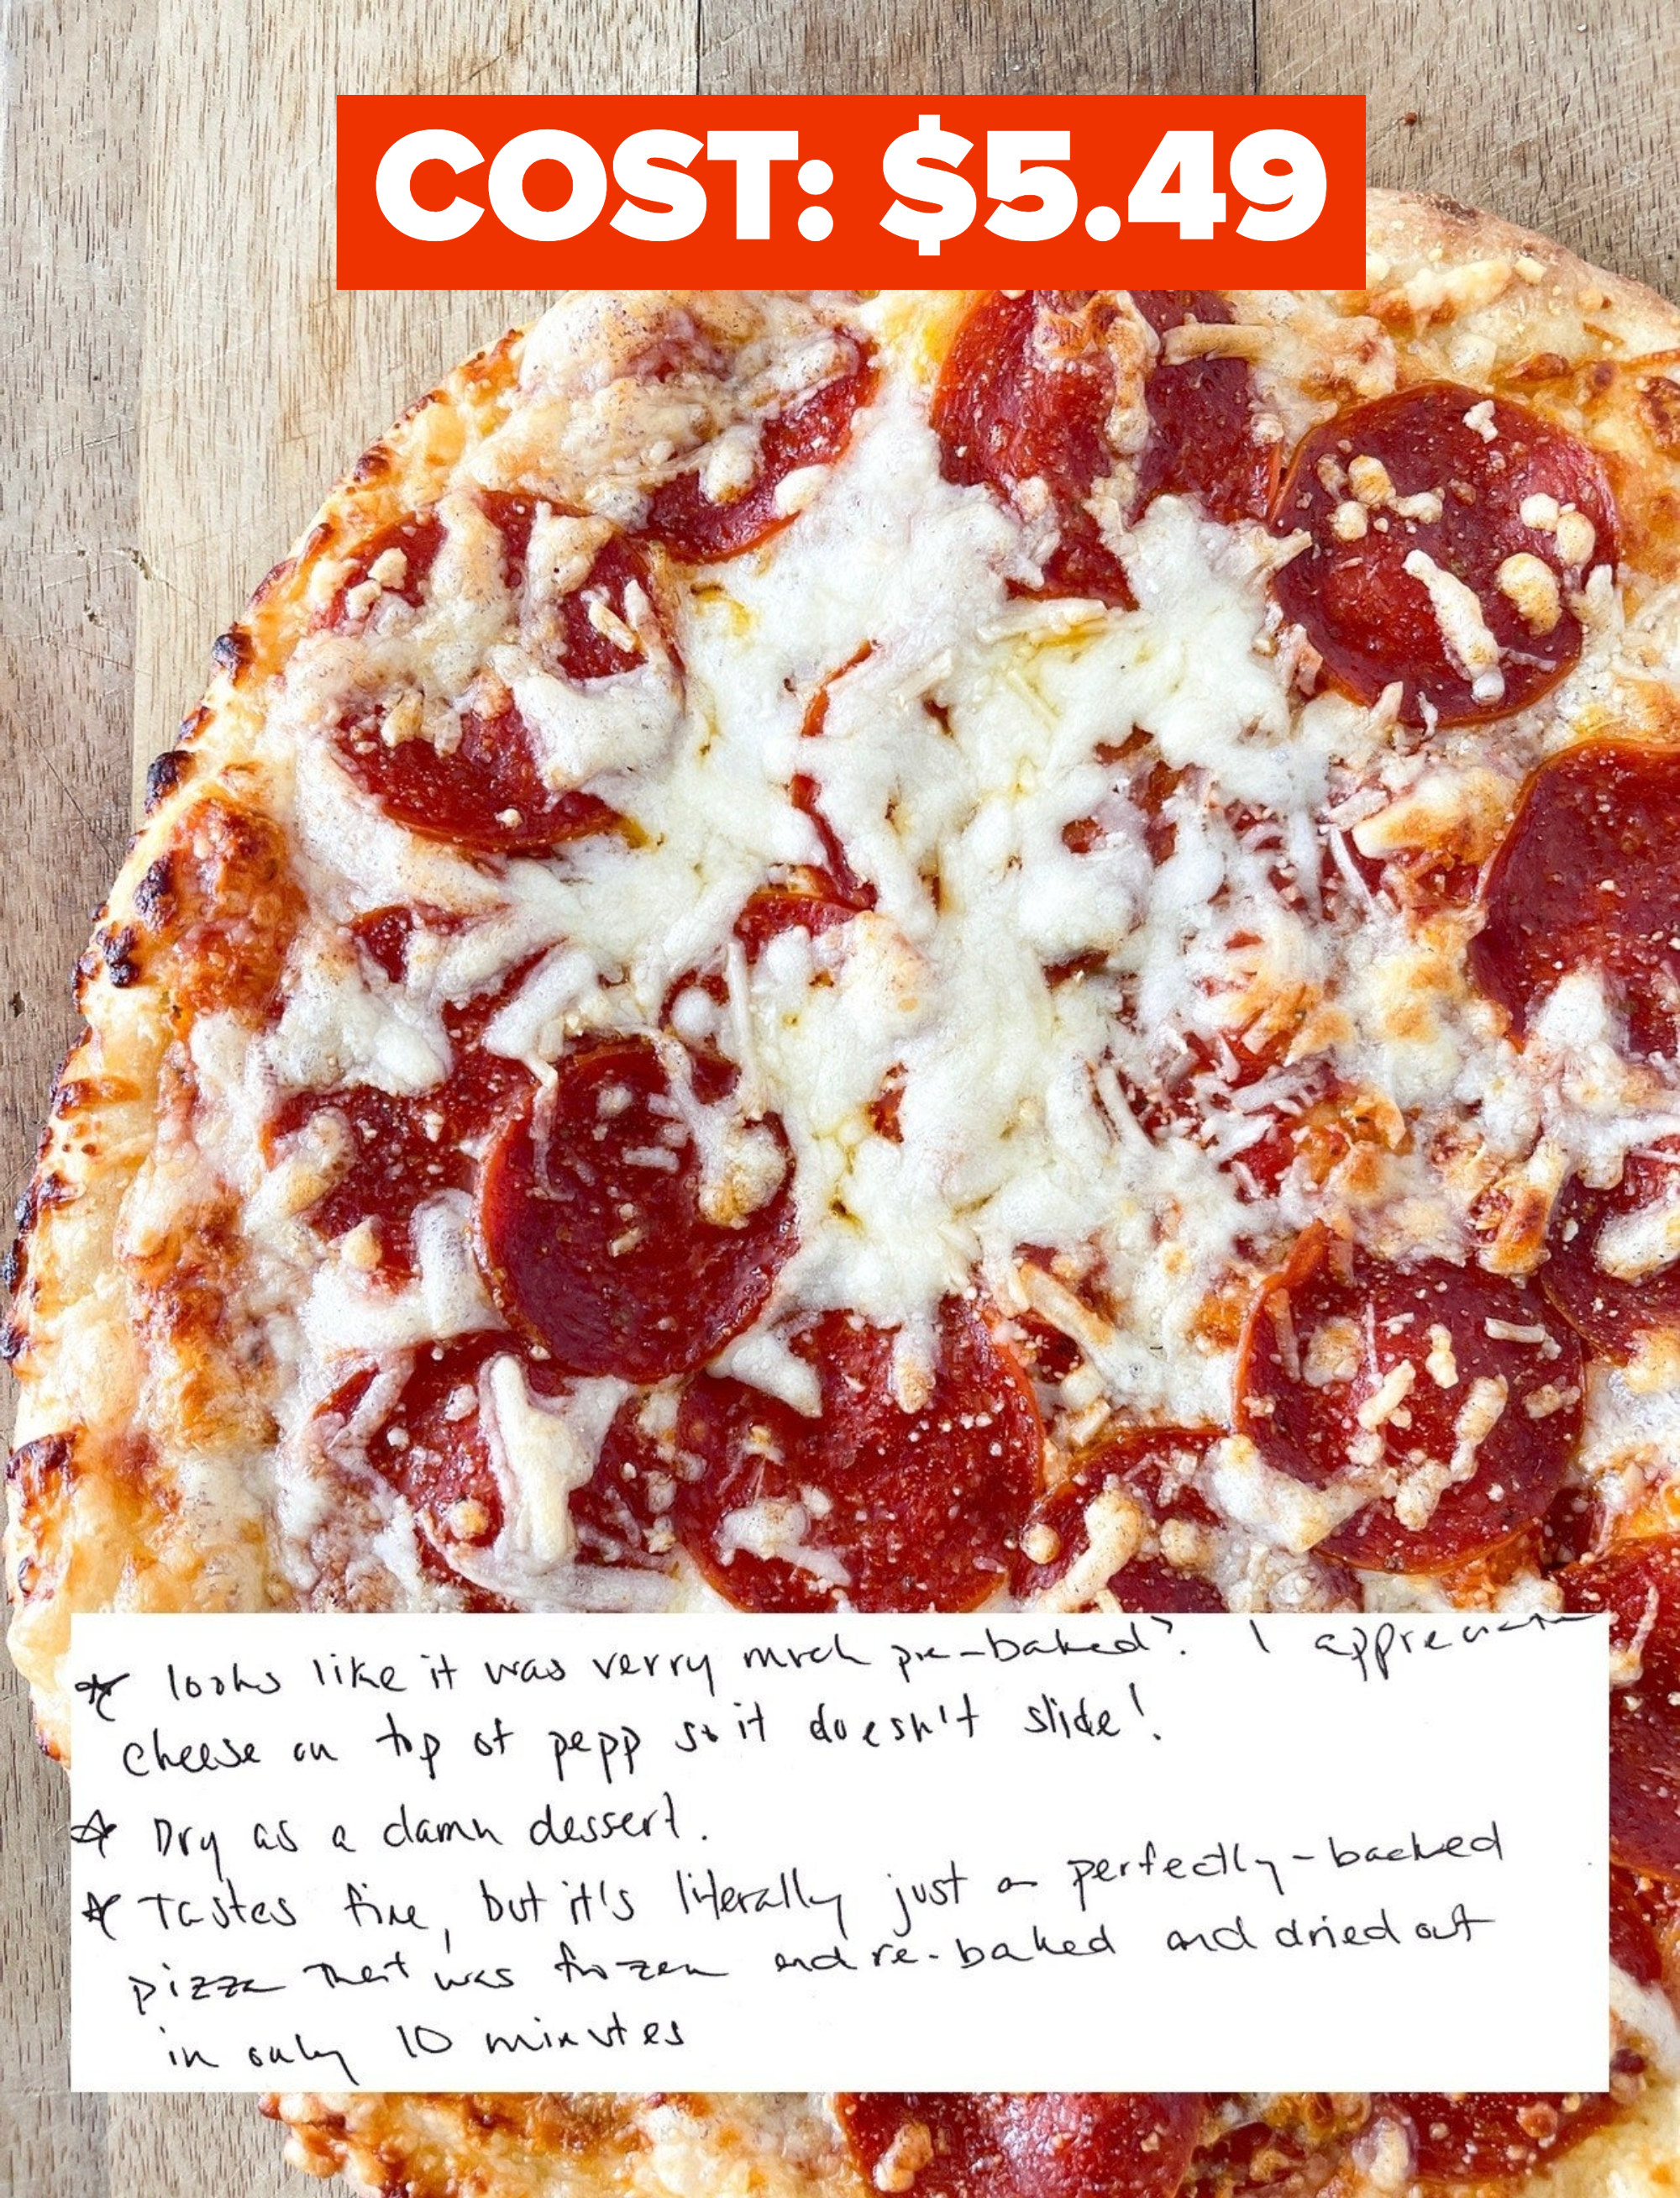 Cooked Trader Joe&#x27;s Pizza That Cost $5.49 with author&#x27;s handwritten notes